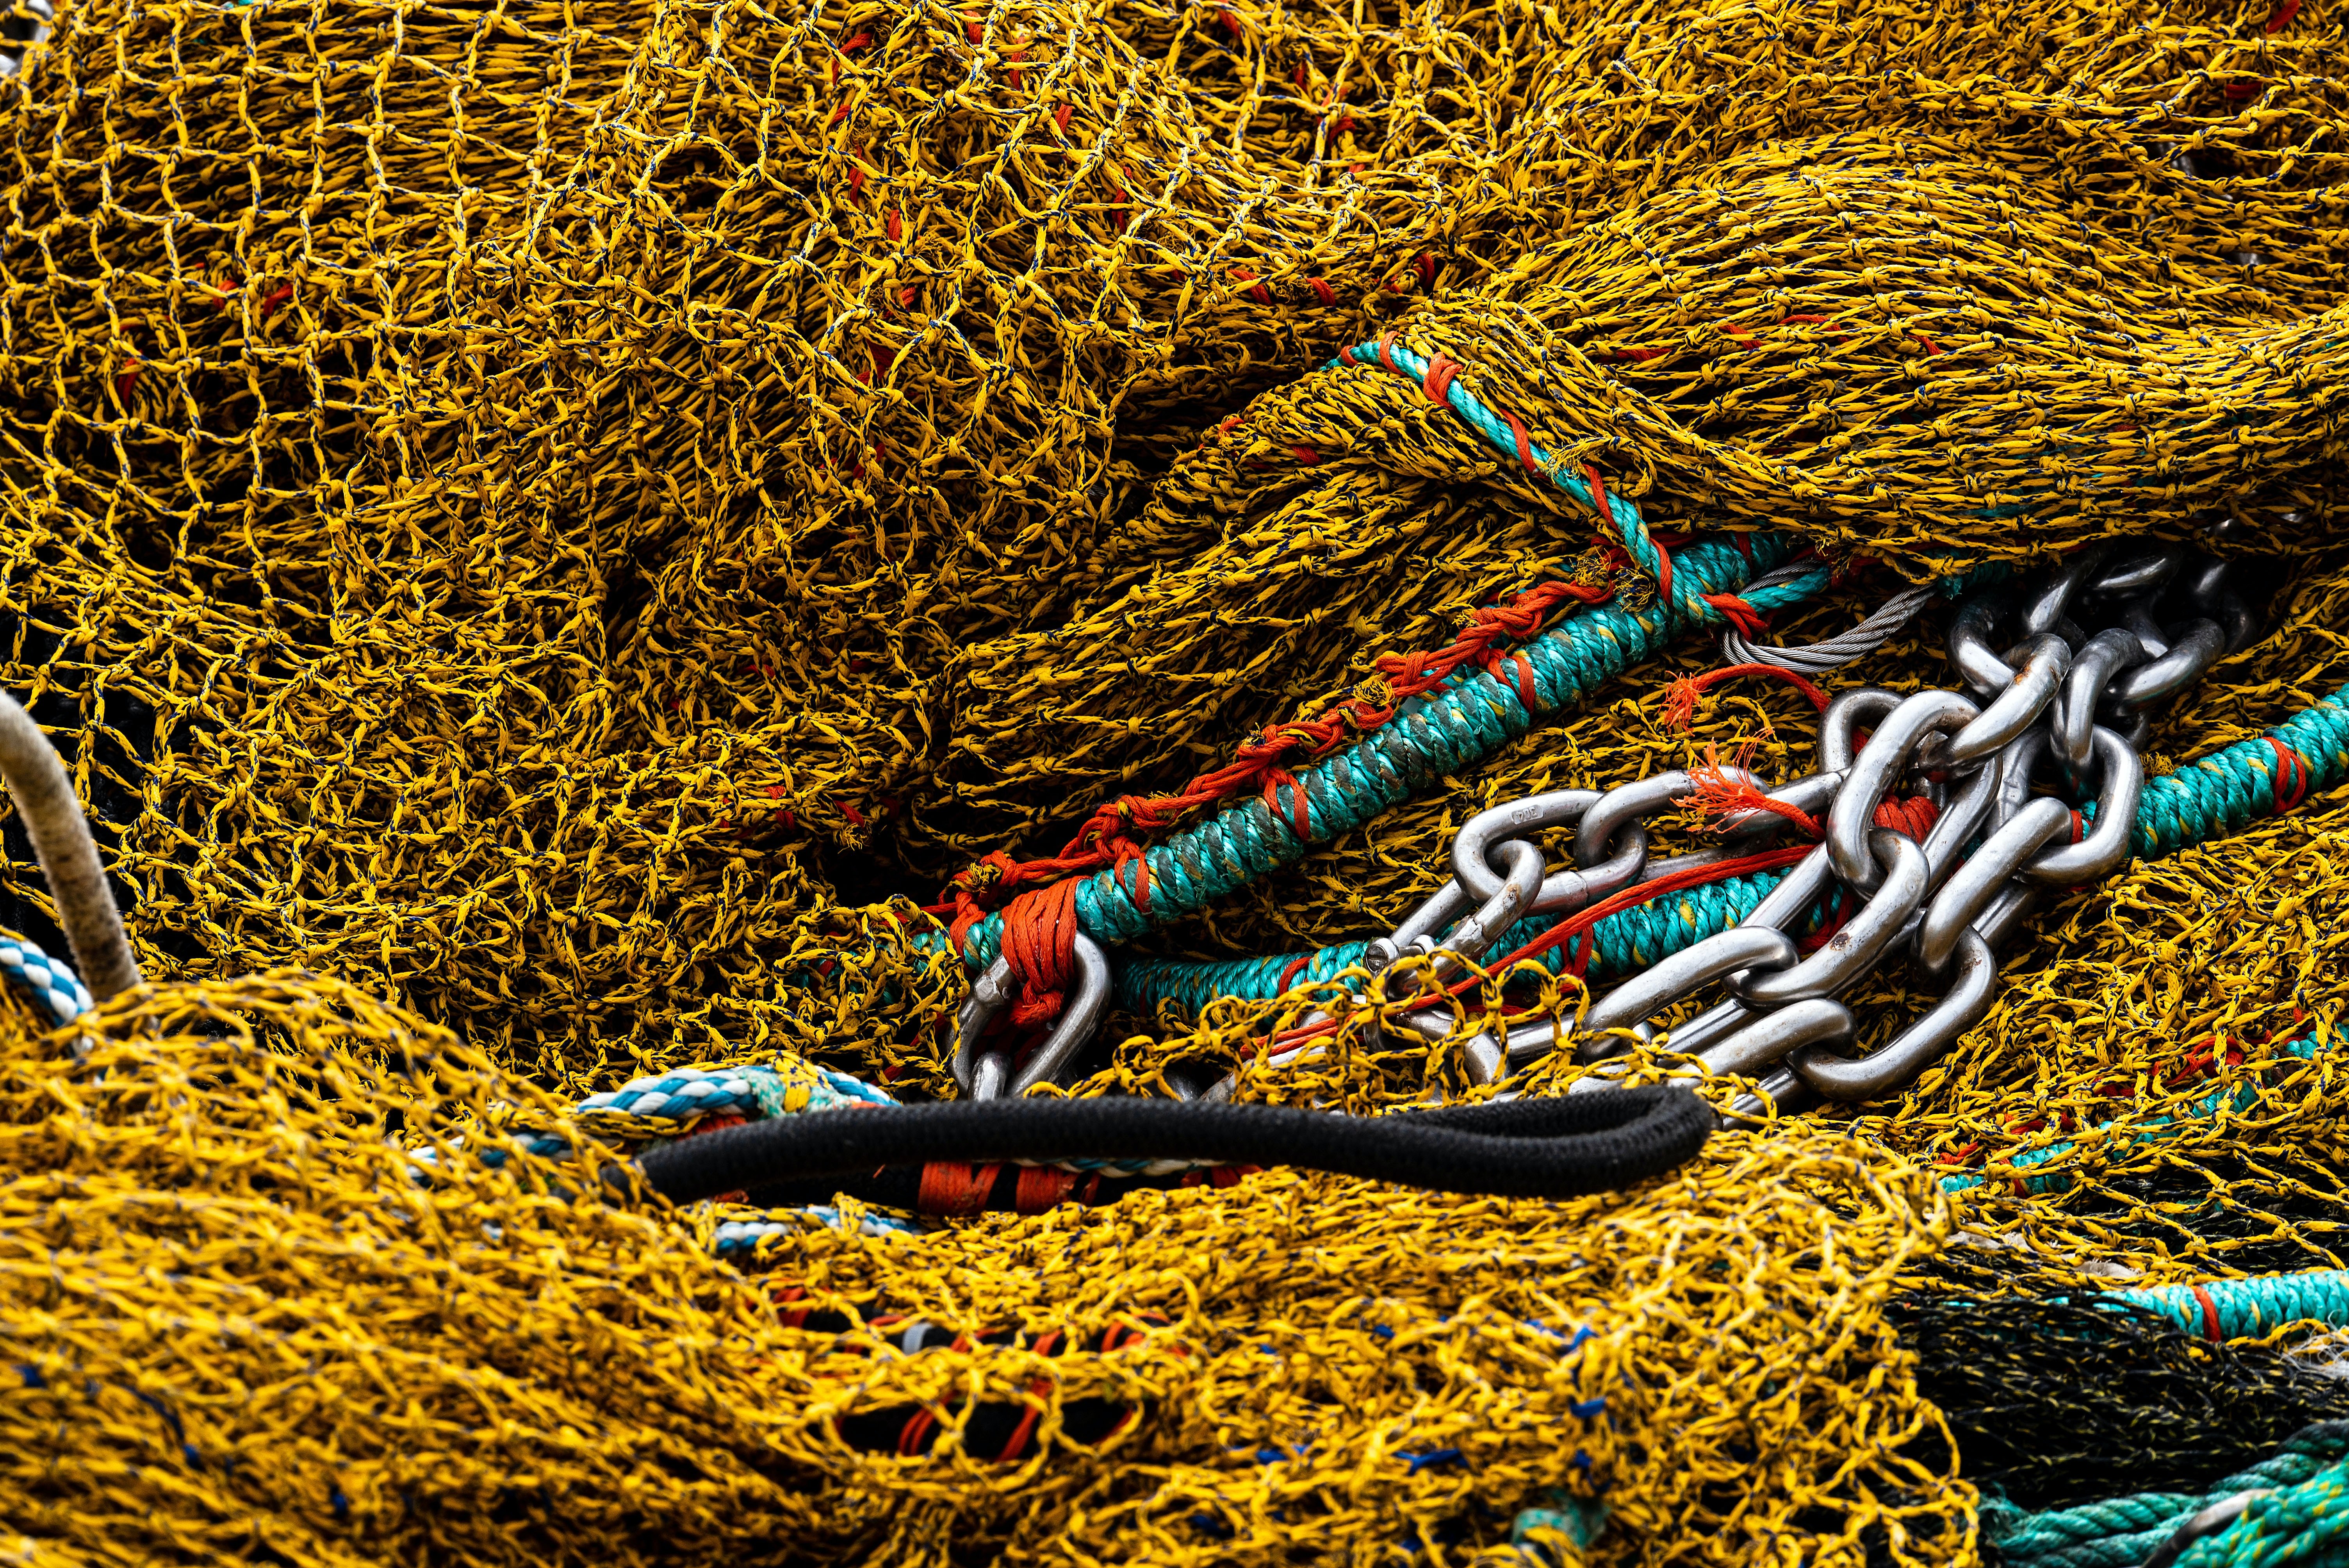 Fishing nets, rope and chain